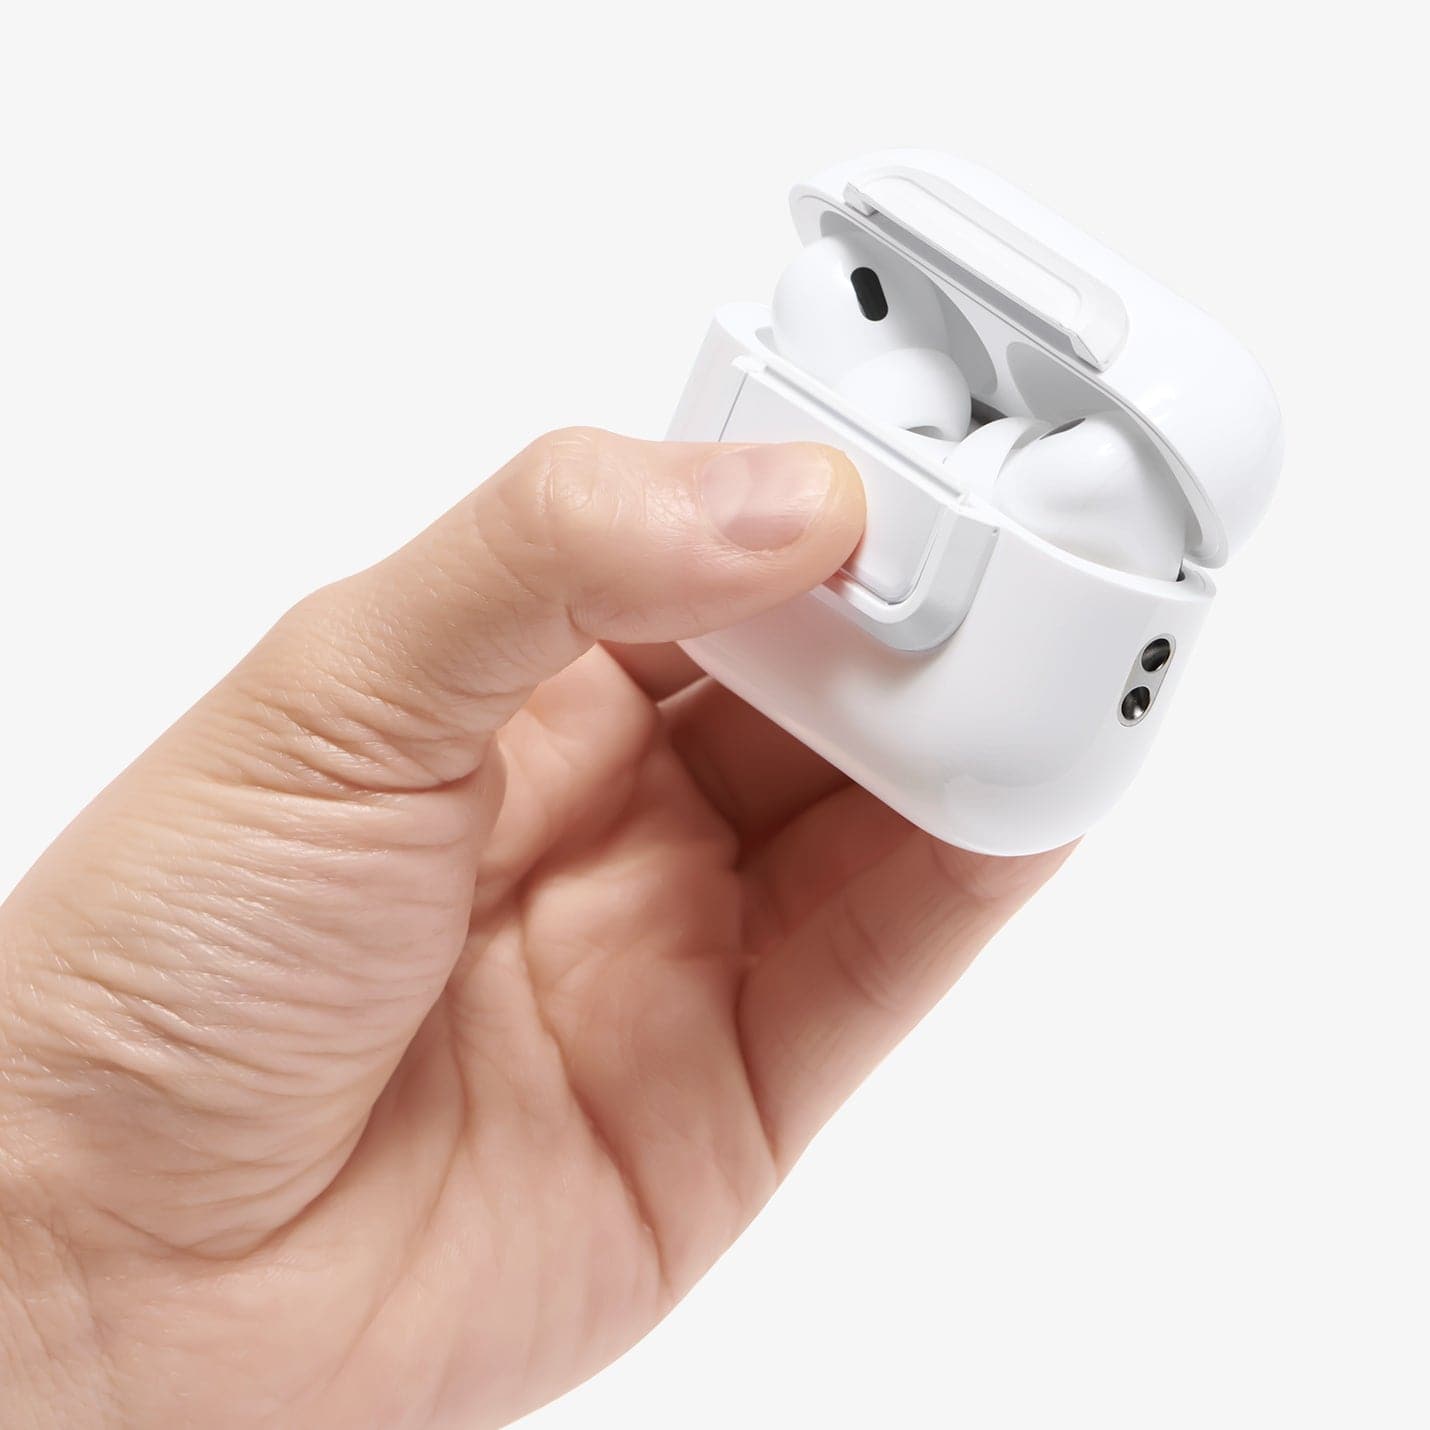 ASD06090 - Apple AirPods Pro / AirPods Pro 2 Case Lock Fit in white showing the AirPods in someone's hand with top open